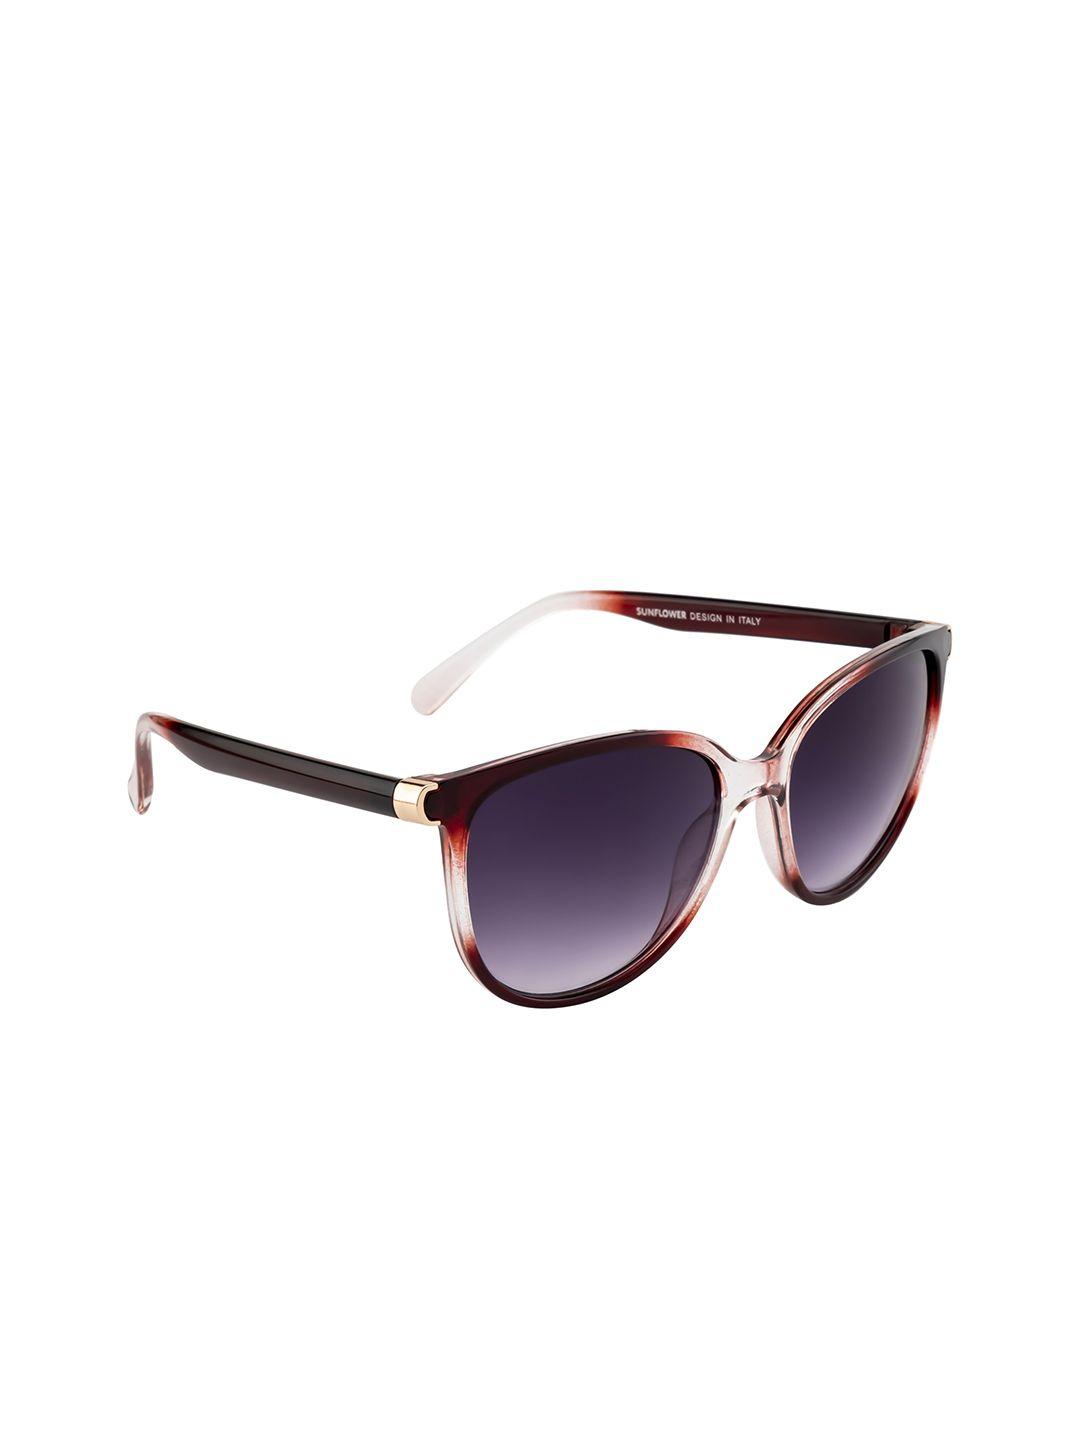 dressberry women grey lens & red oval sunglasses with uv protected lens db-p8562-c7